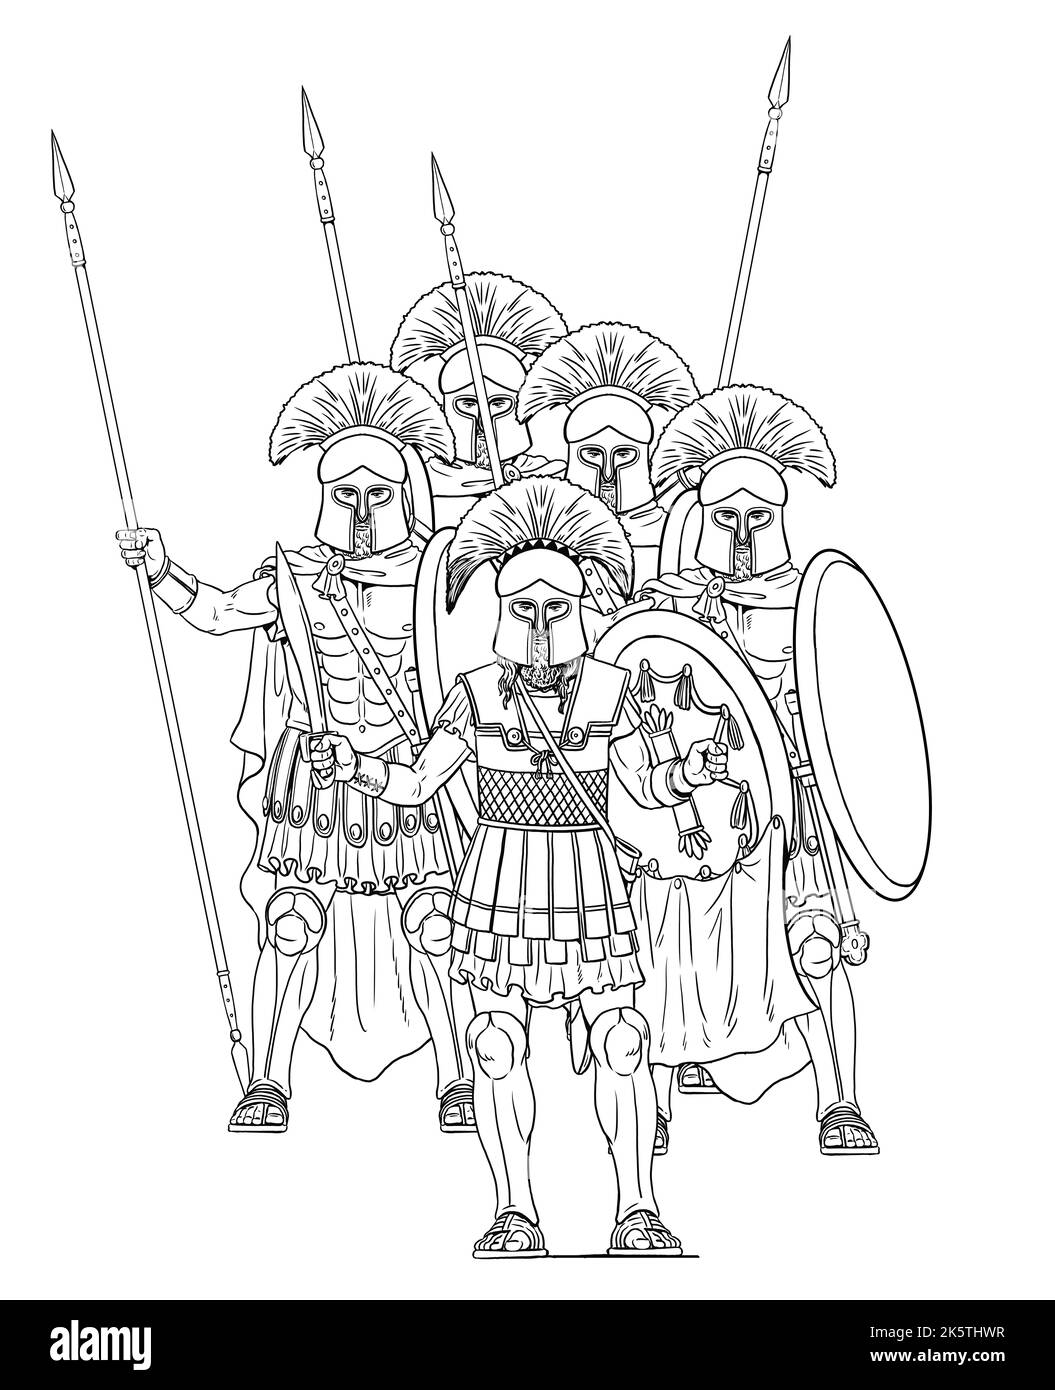 King Leonidas and his Spartans.  Ancient warriors. Drawing with greek hoplites. Stock Photo